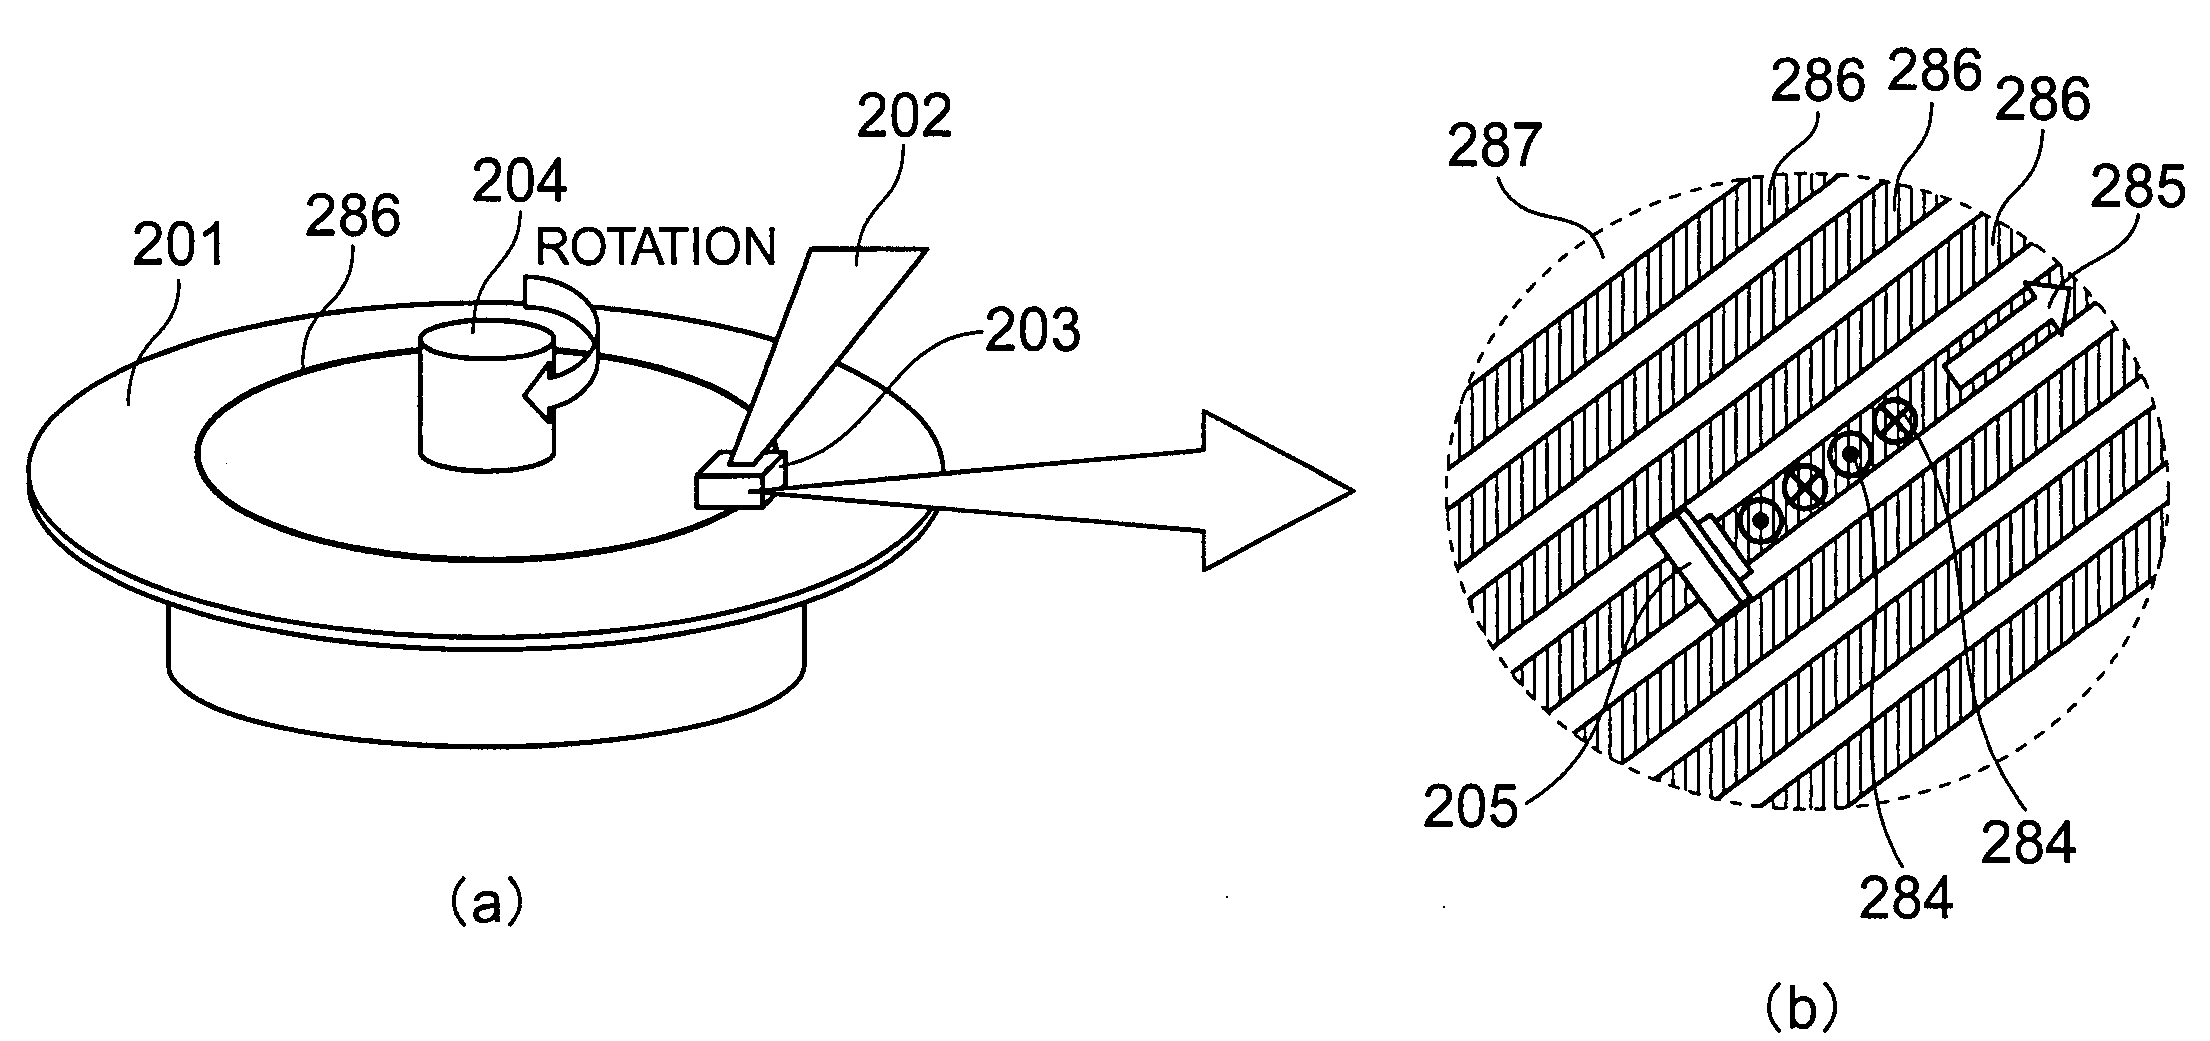 Magnetic recording head and magnetic recording device